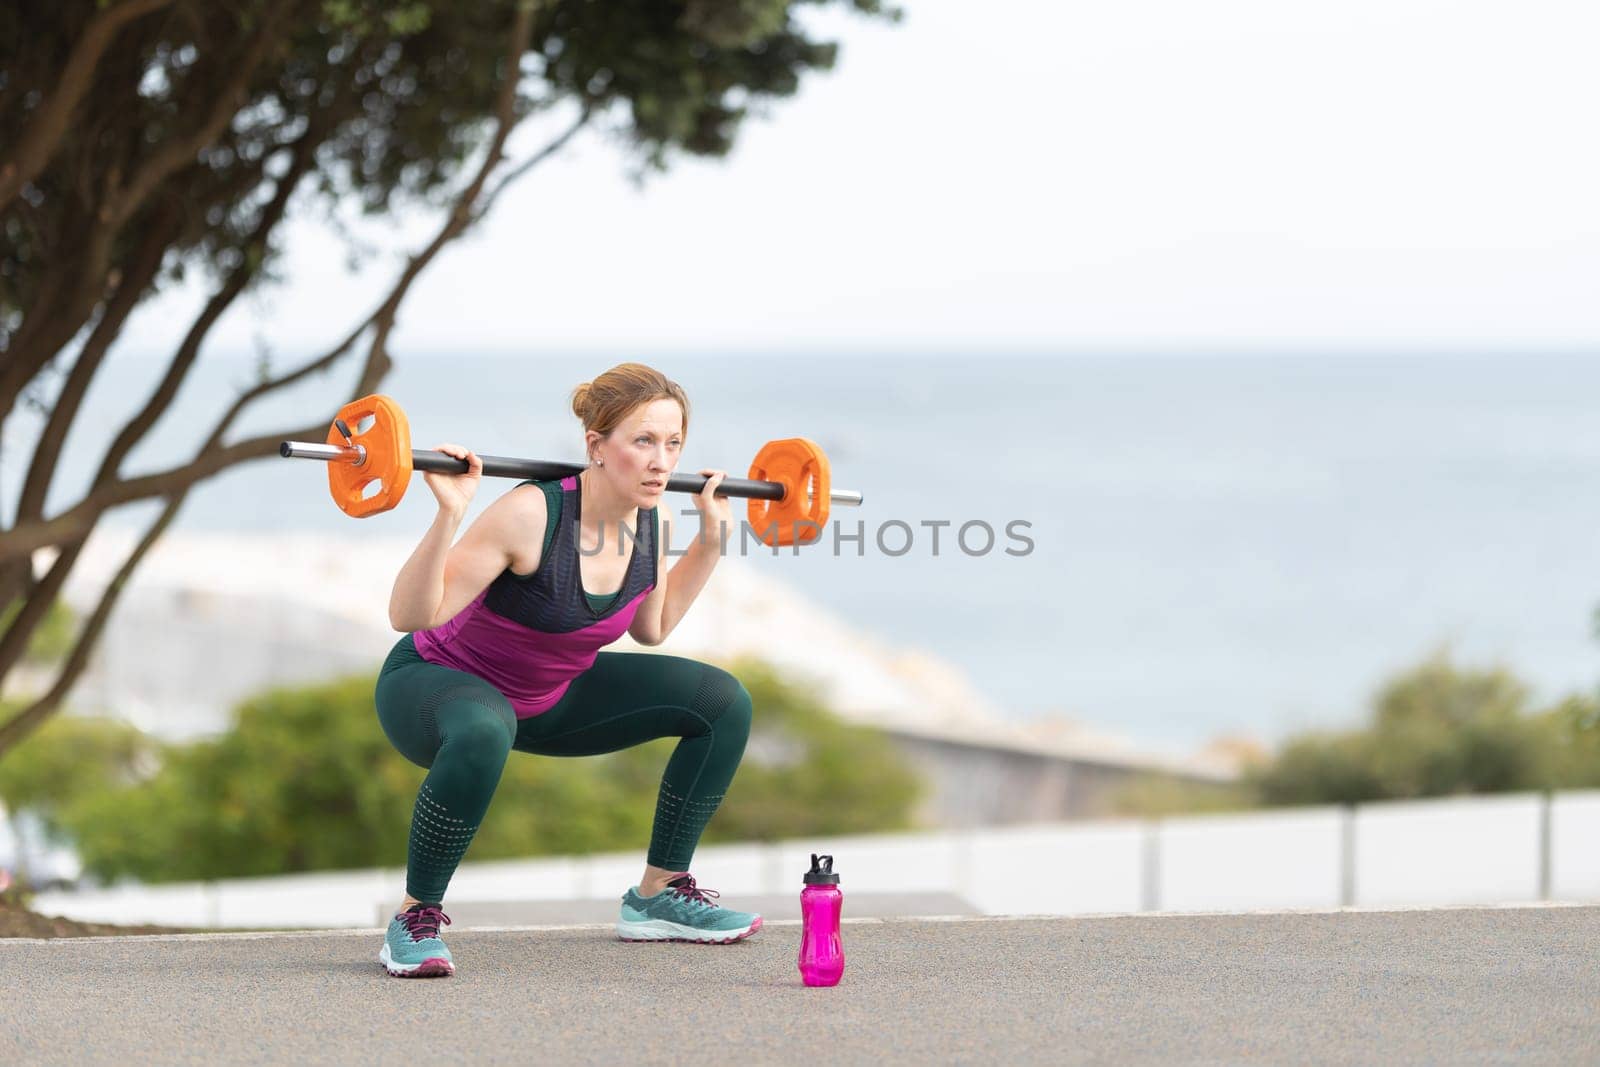 Adult athletic woman squatting with a dumbbell on her shoulders. Mid shot